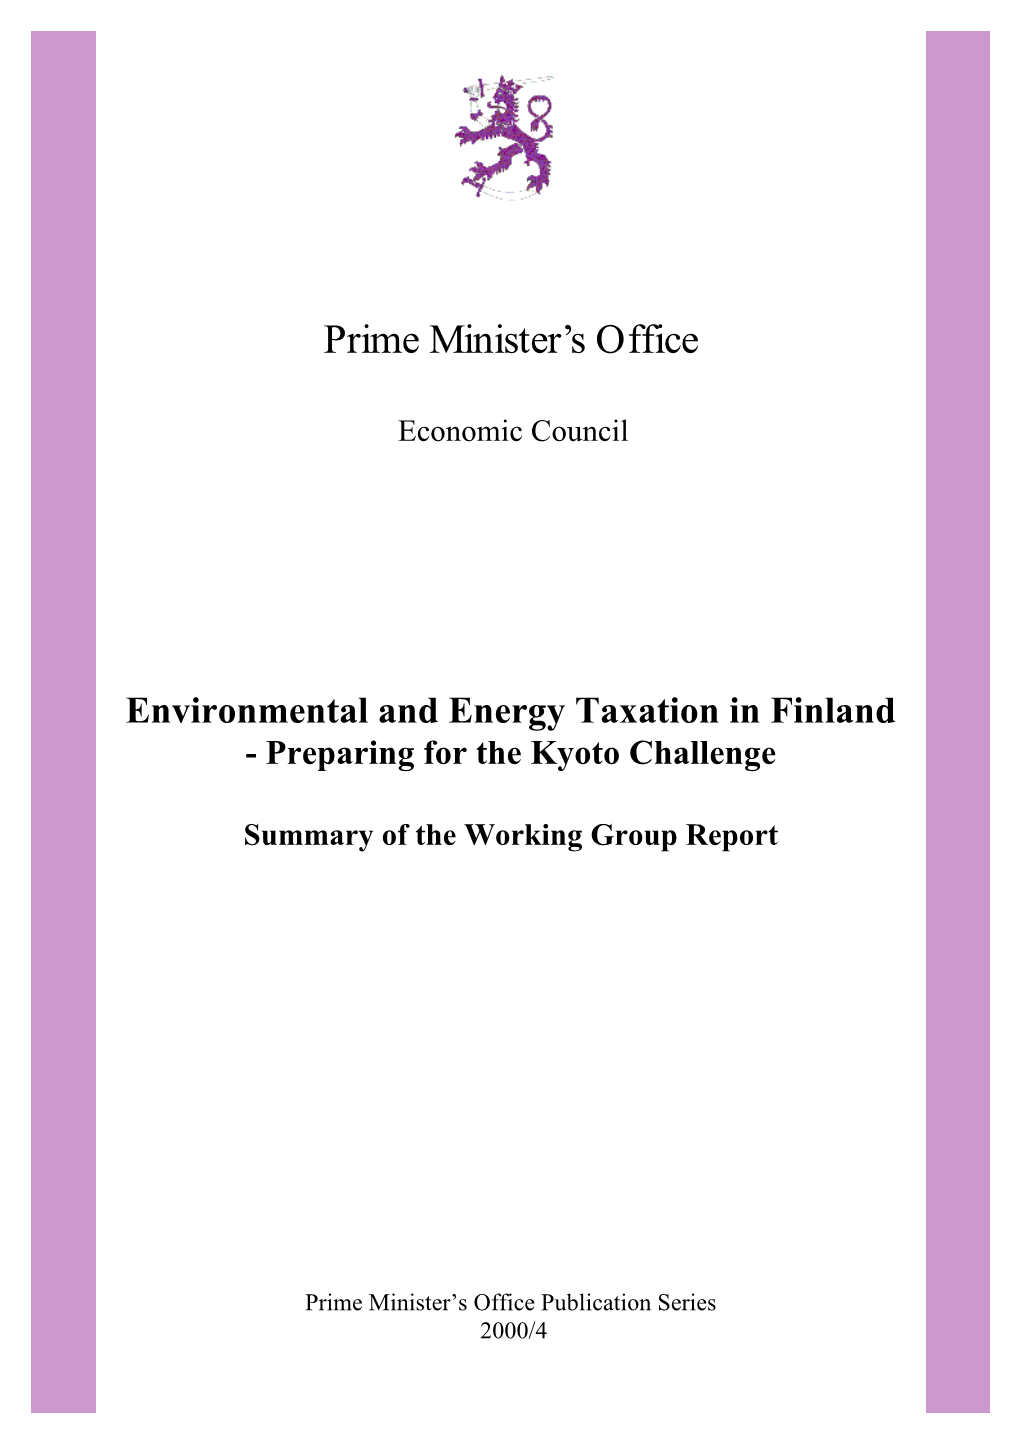 Environmental and Energy Taxation in Finland - Preparing for the Kyoto Challenge